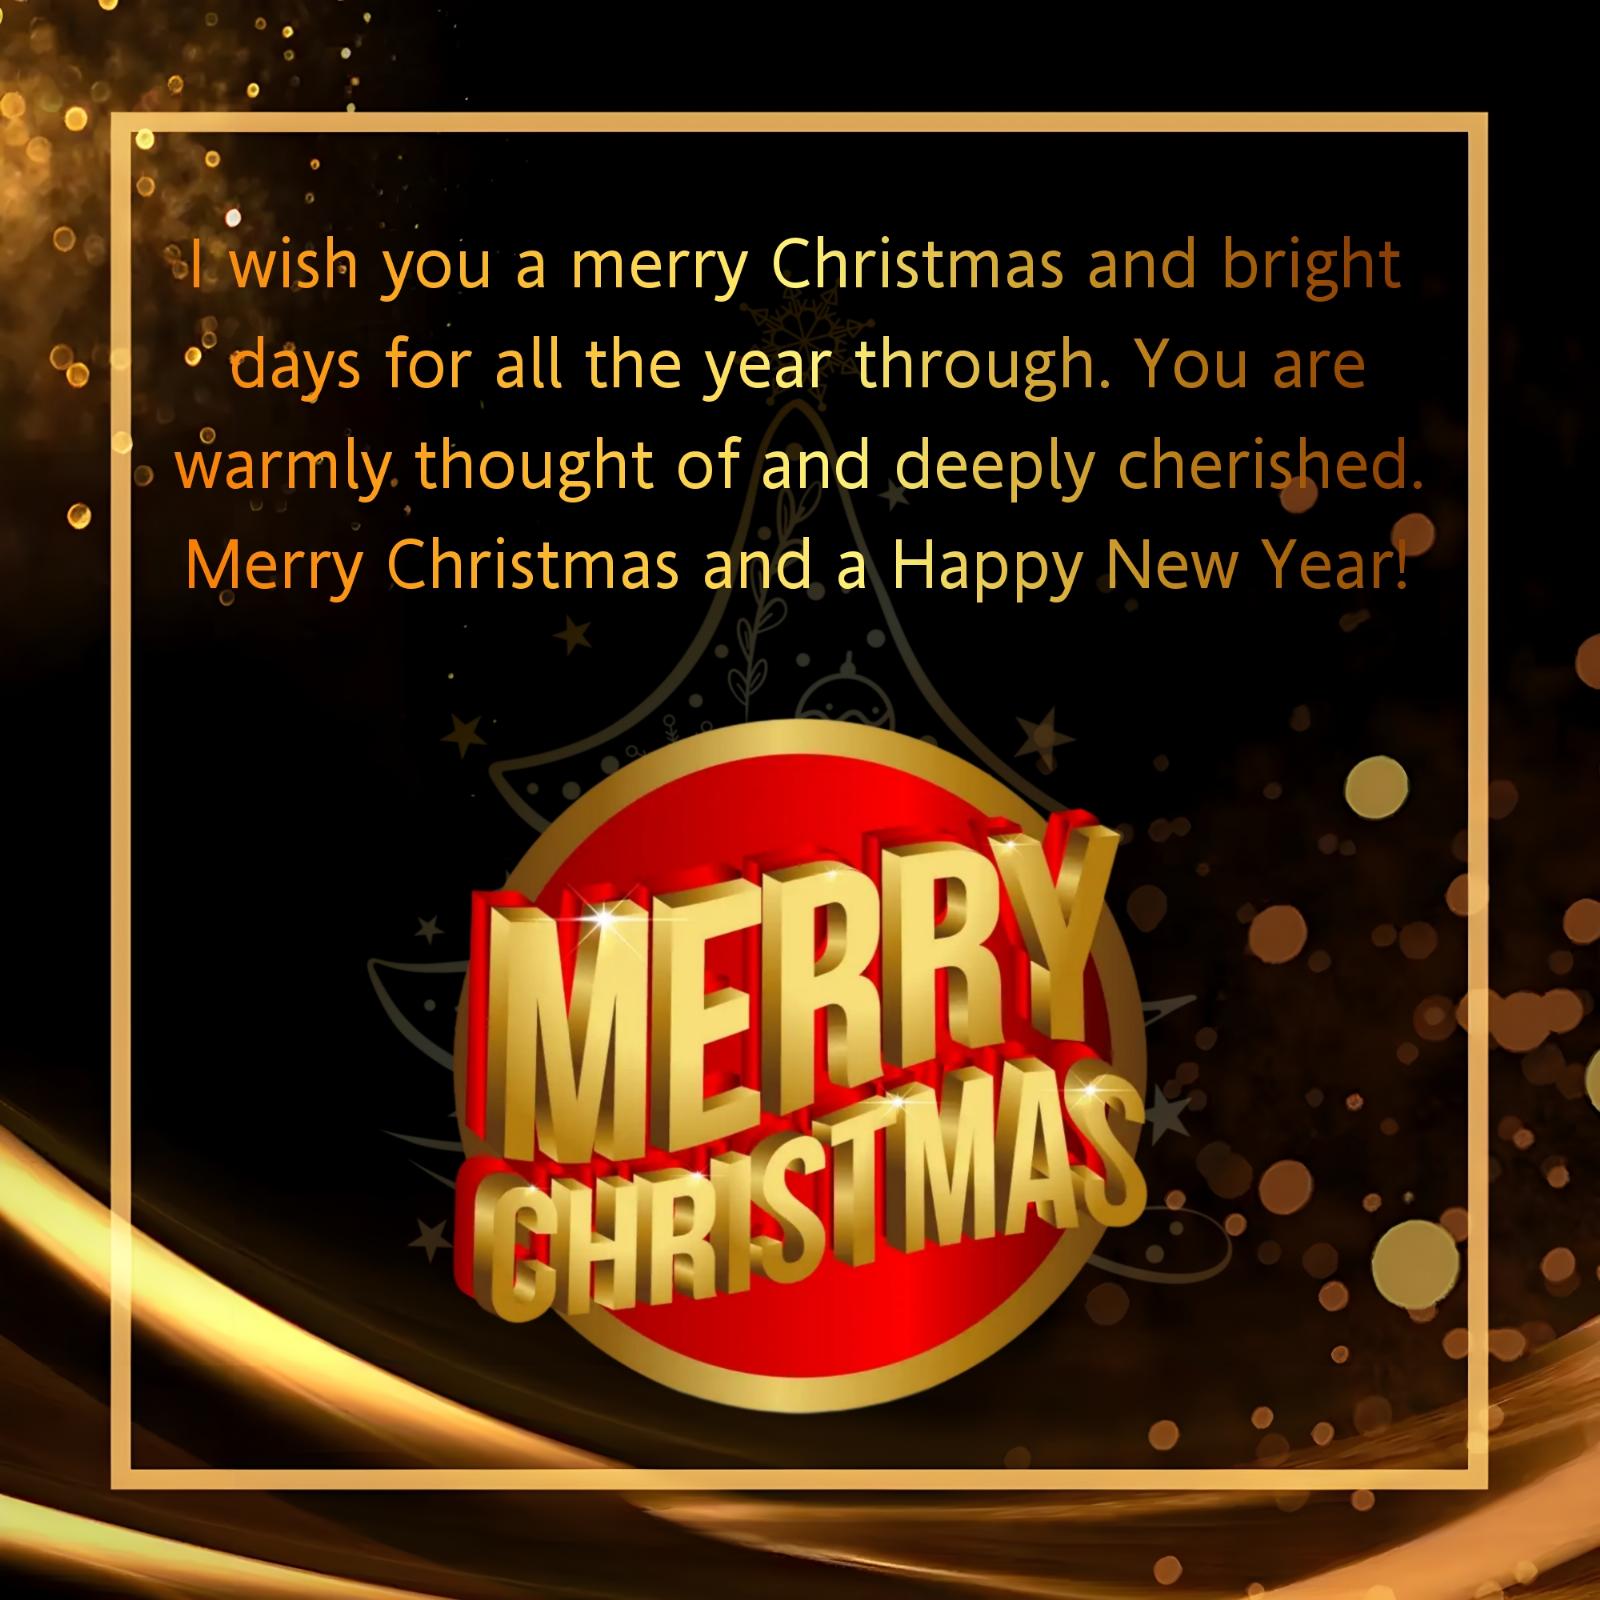 I wish you a merry Christmas and bright days for all the year through